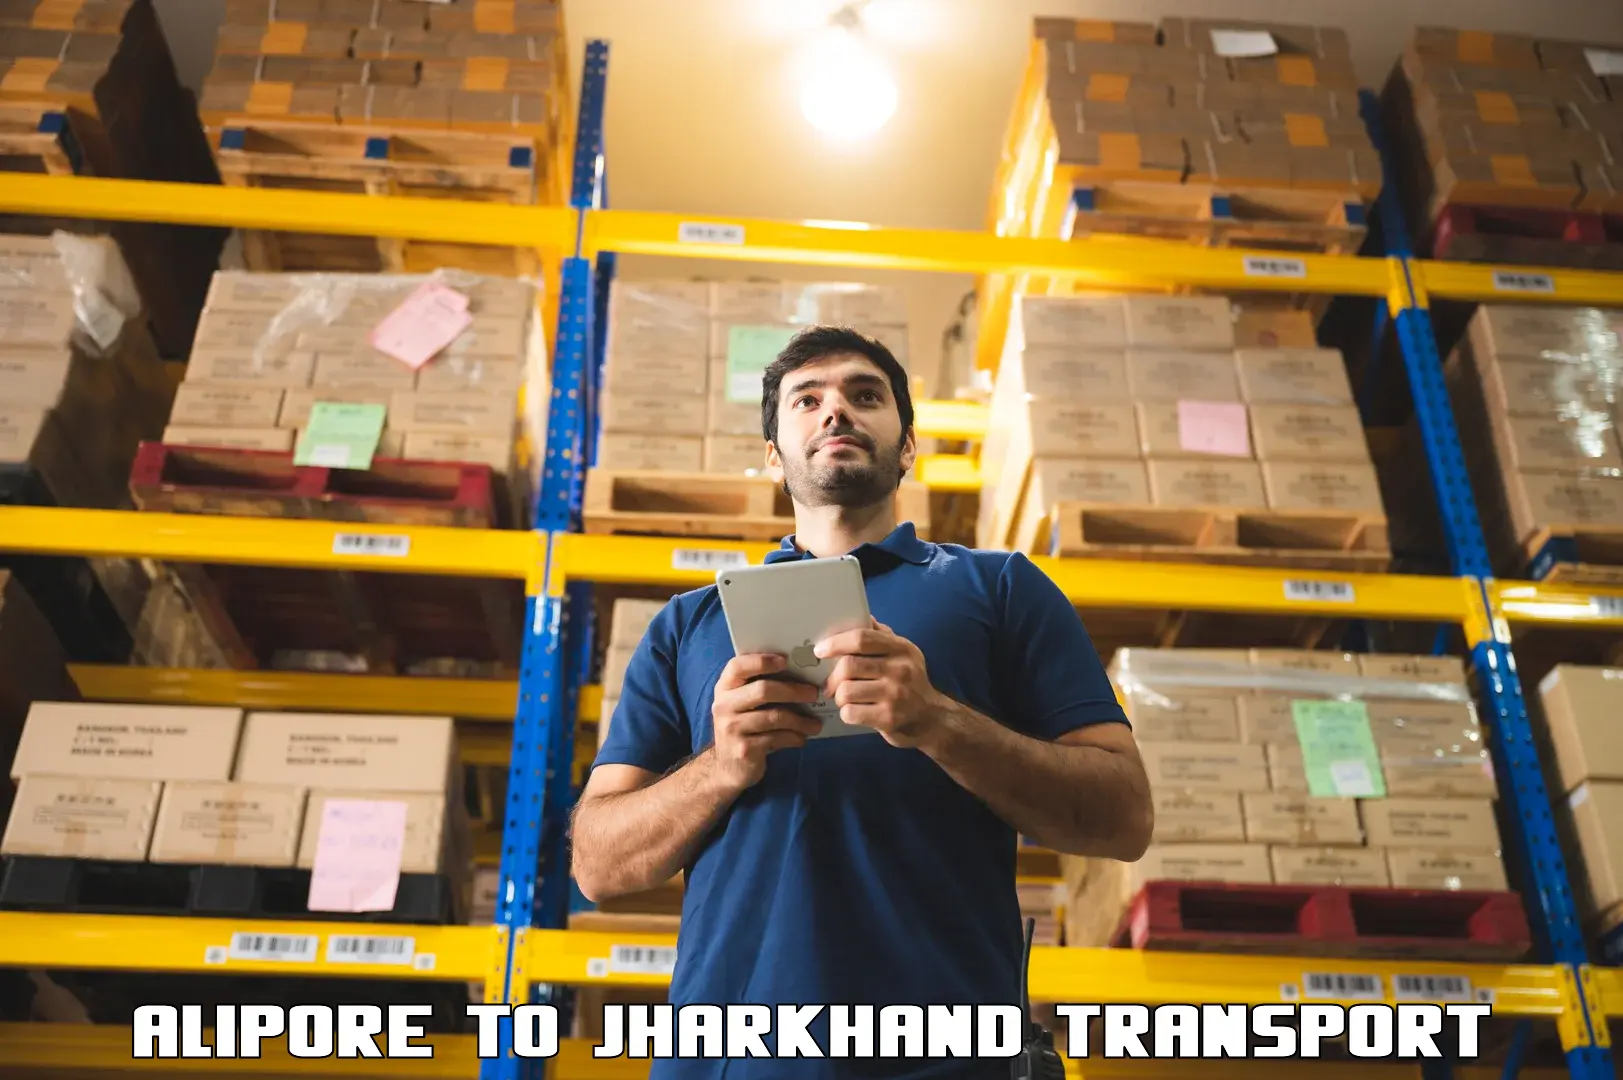 Truck transport companies in India Alipore to Jamshedpur